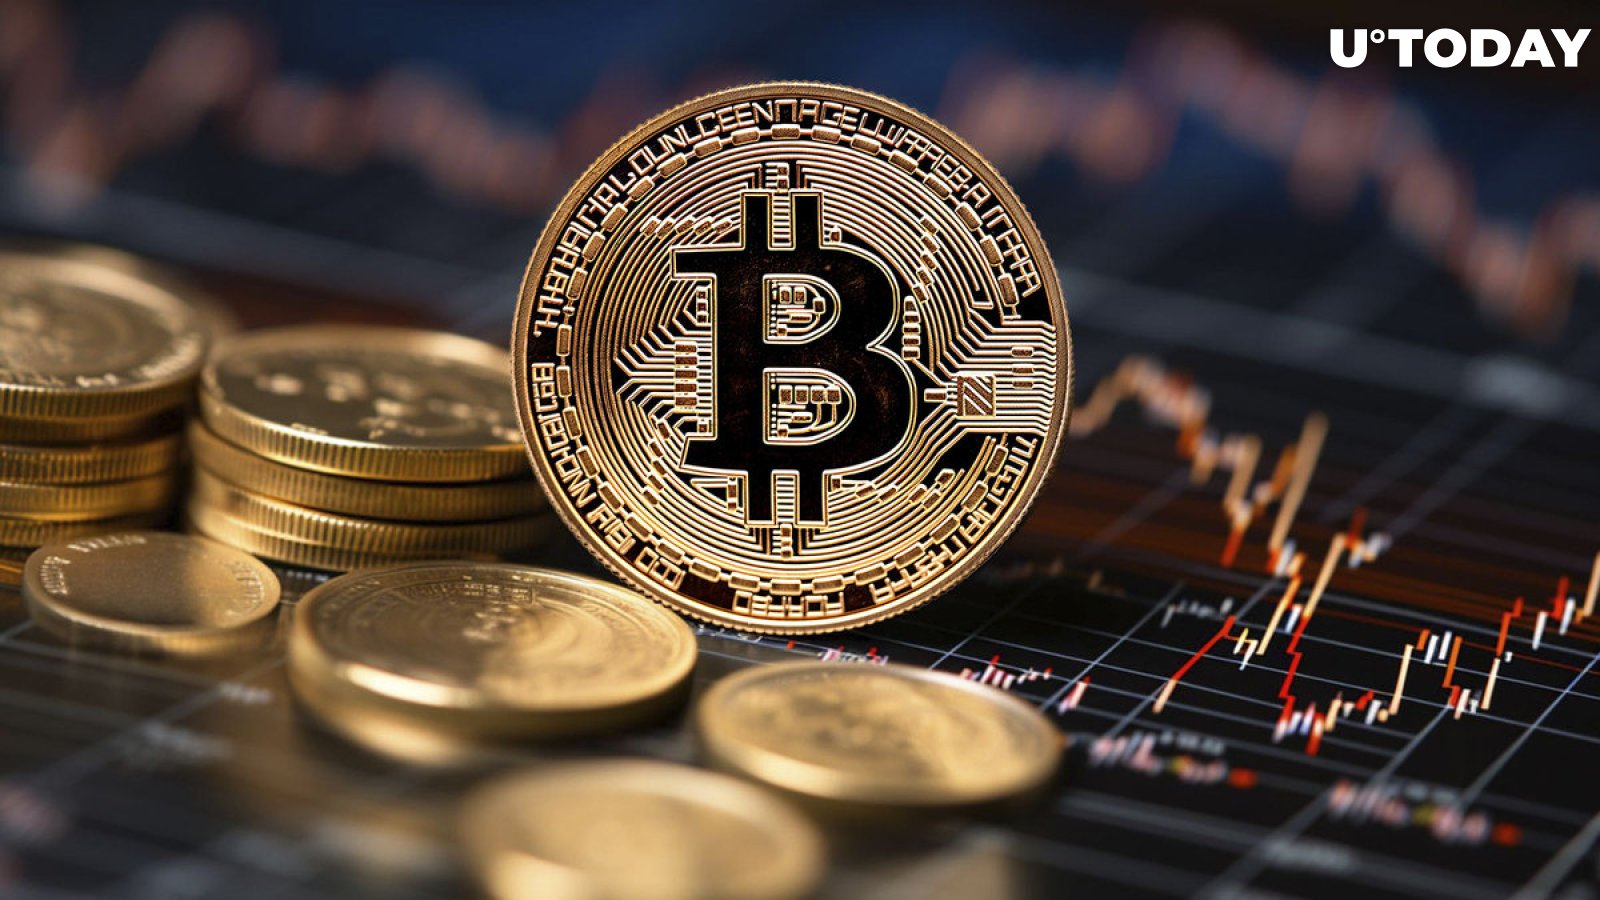 Bitcoin (BTC) Could Be on Verge of Reversal, This Indicator Suggests